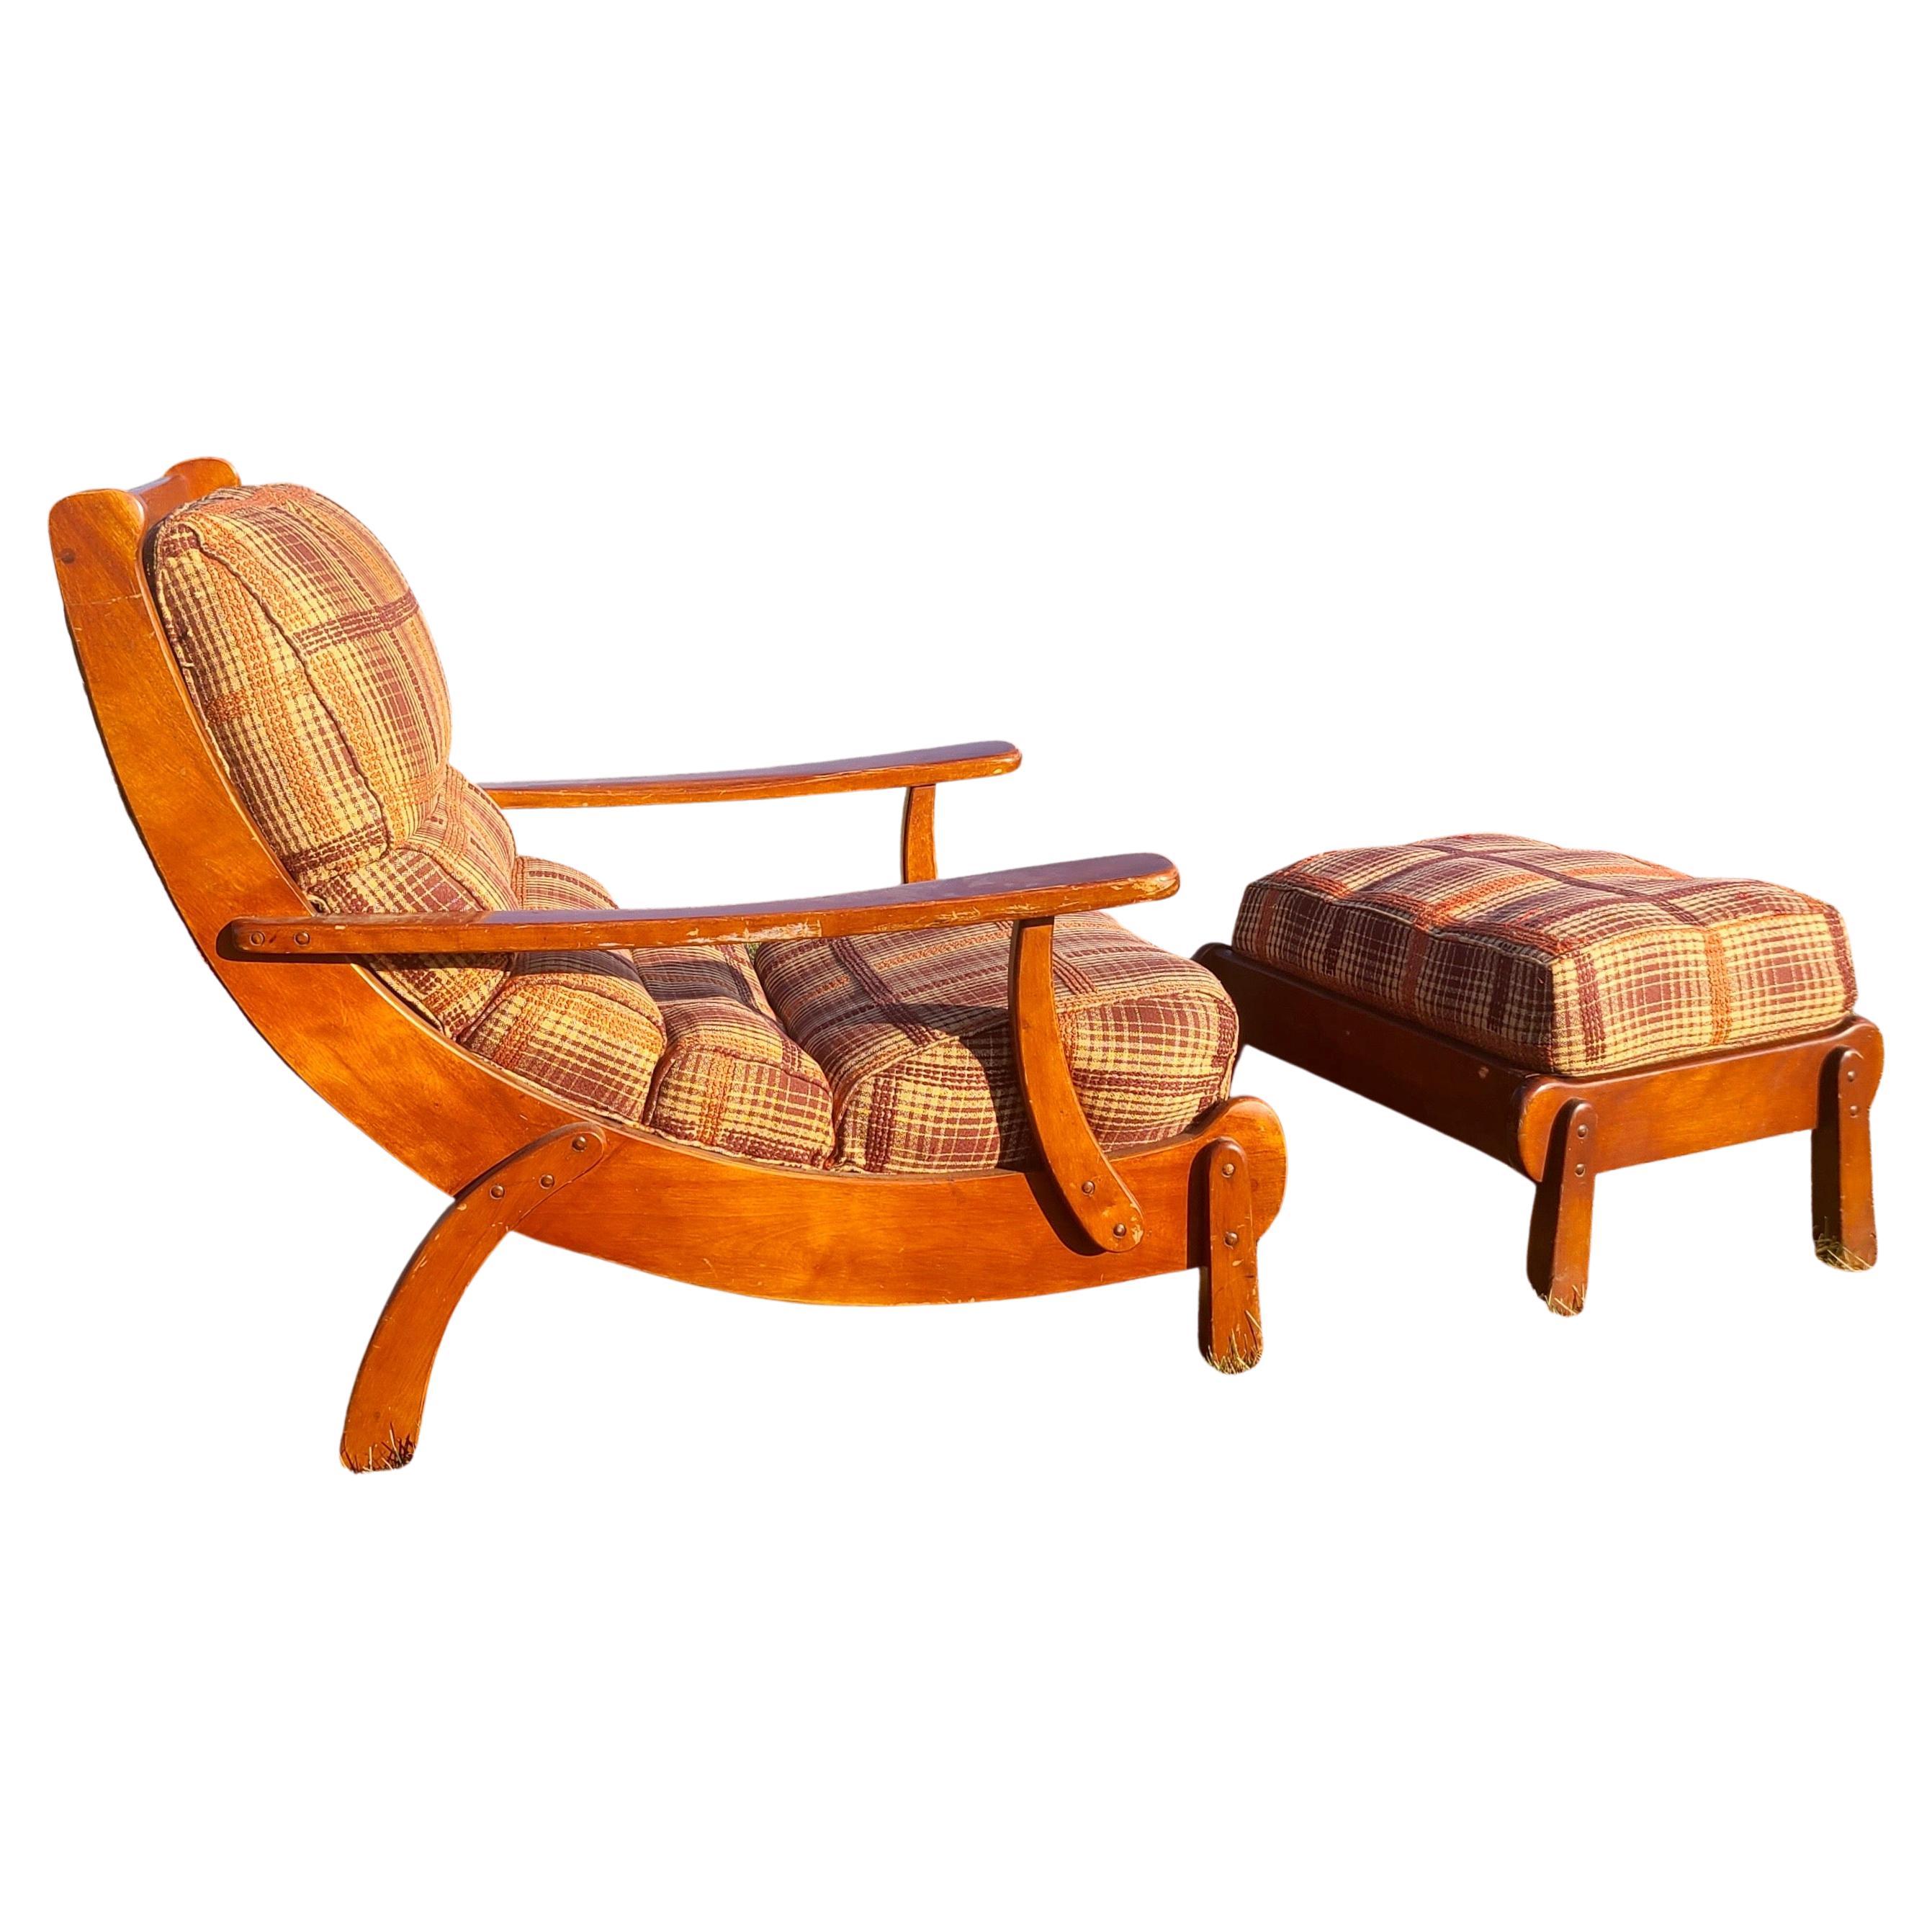 Streamline Art Deco lounge chair.
Seems like a Cushman furniture piece.
Marked: 24 36 Priscilla. 
Perhaps a date of manufacturing, or a catalog 
reference number. Likely indicates 1936 either way.

Main cushion similar to styles by Gilbert